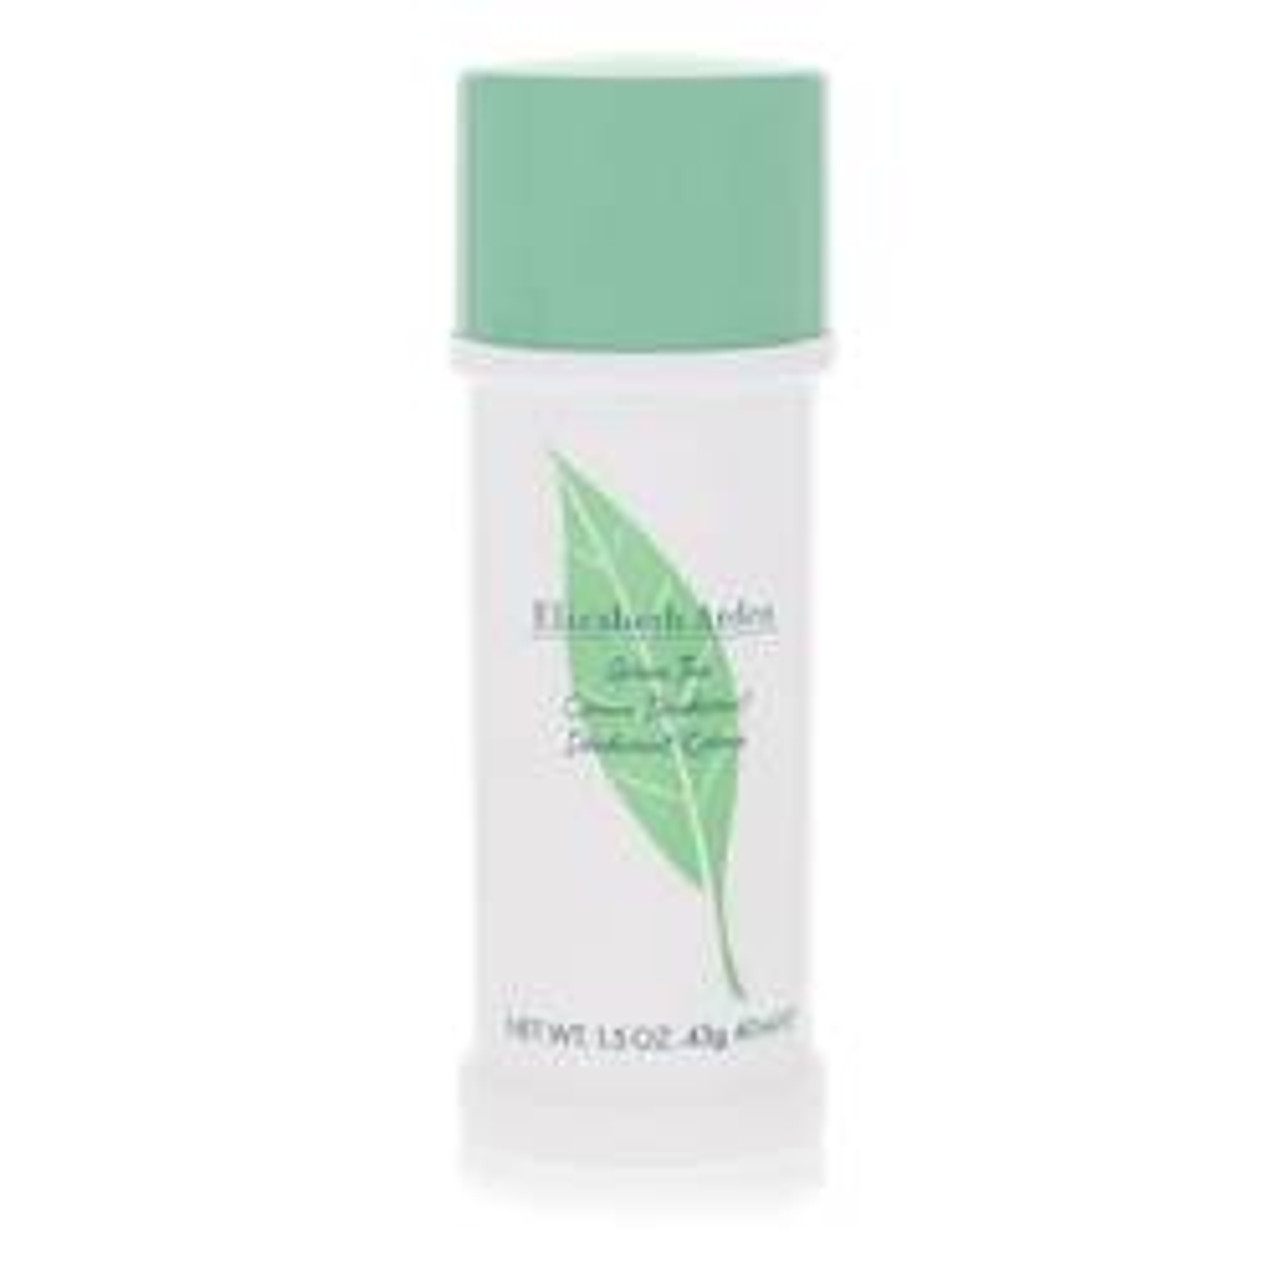 Green Tea Perfume By Elizabeth Arden Deodorant Cream 1.5 oz for Women - [From 27.00 - Choose pk Qty ] - *Ships from Miami